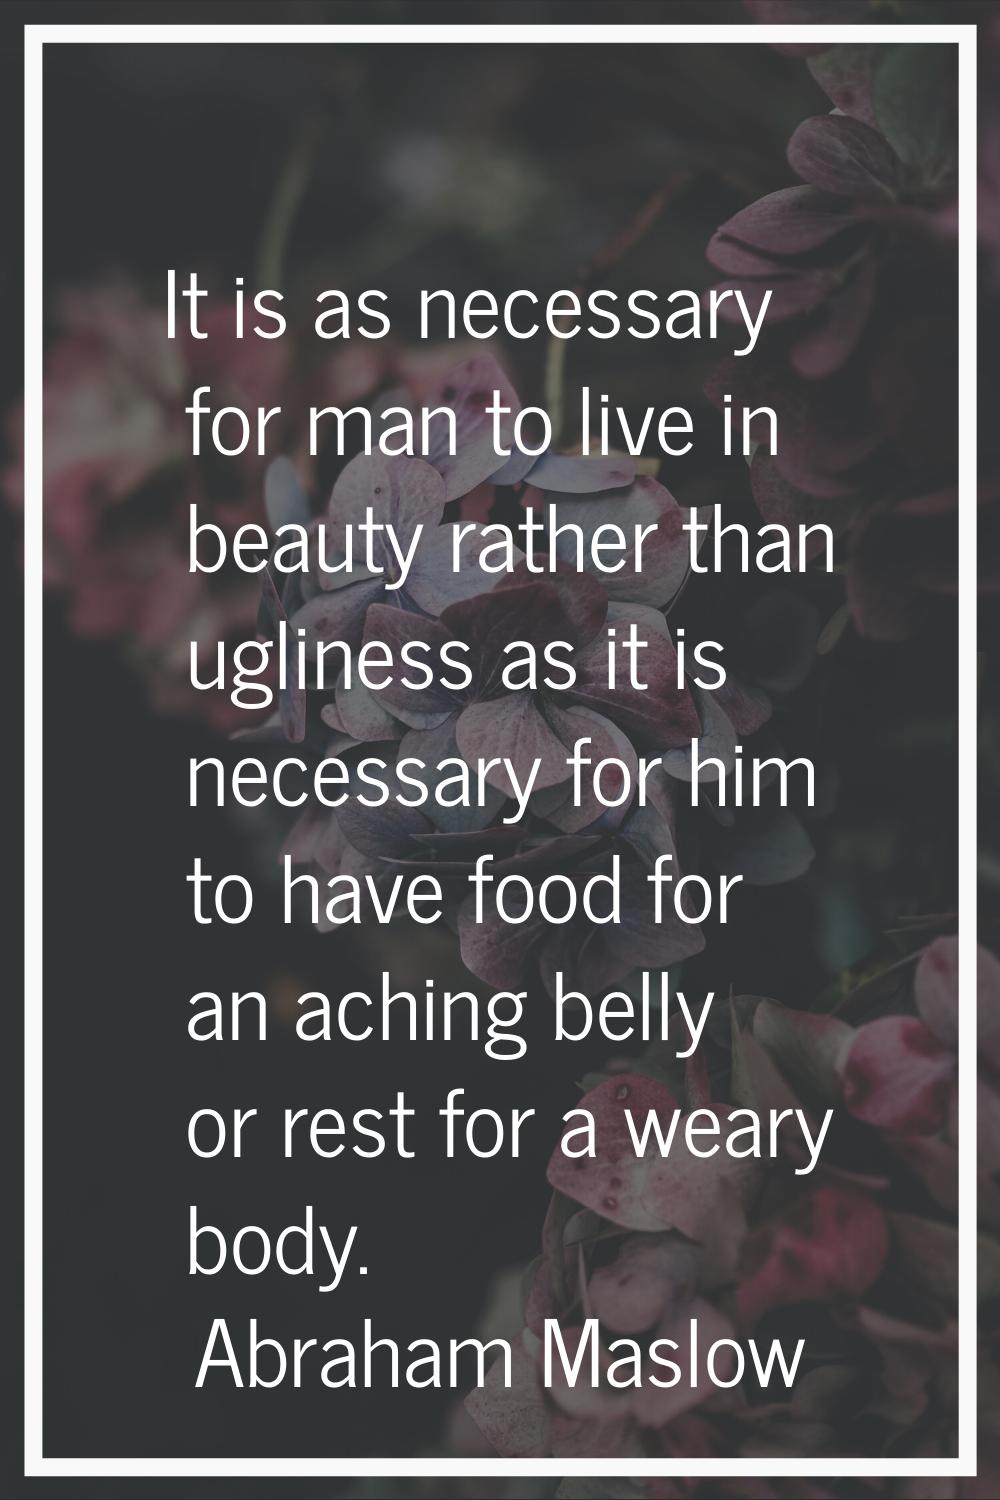 It is as necessary for man to live in beauty rather than ugliness as it is necessary for him to hav